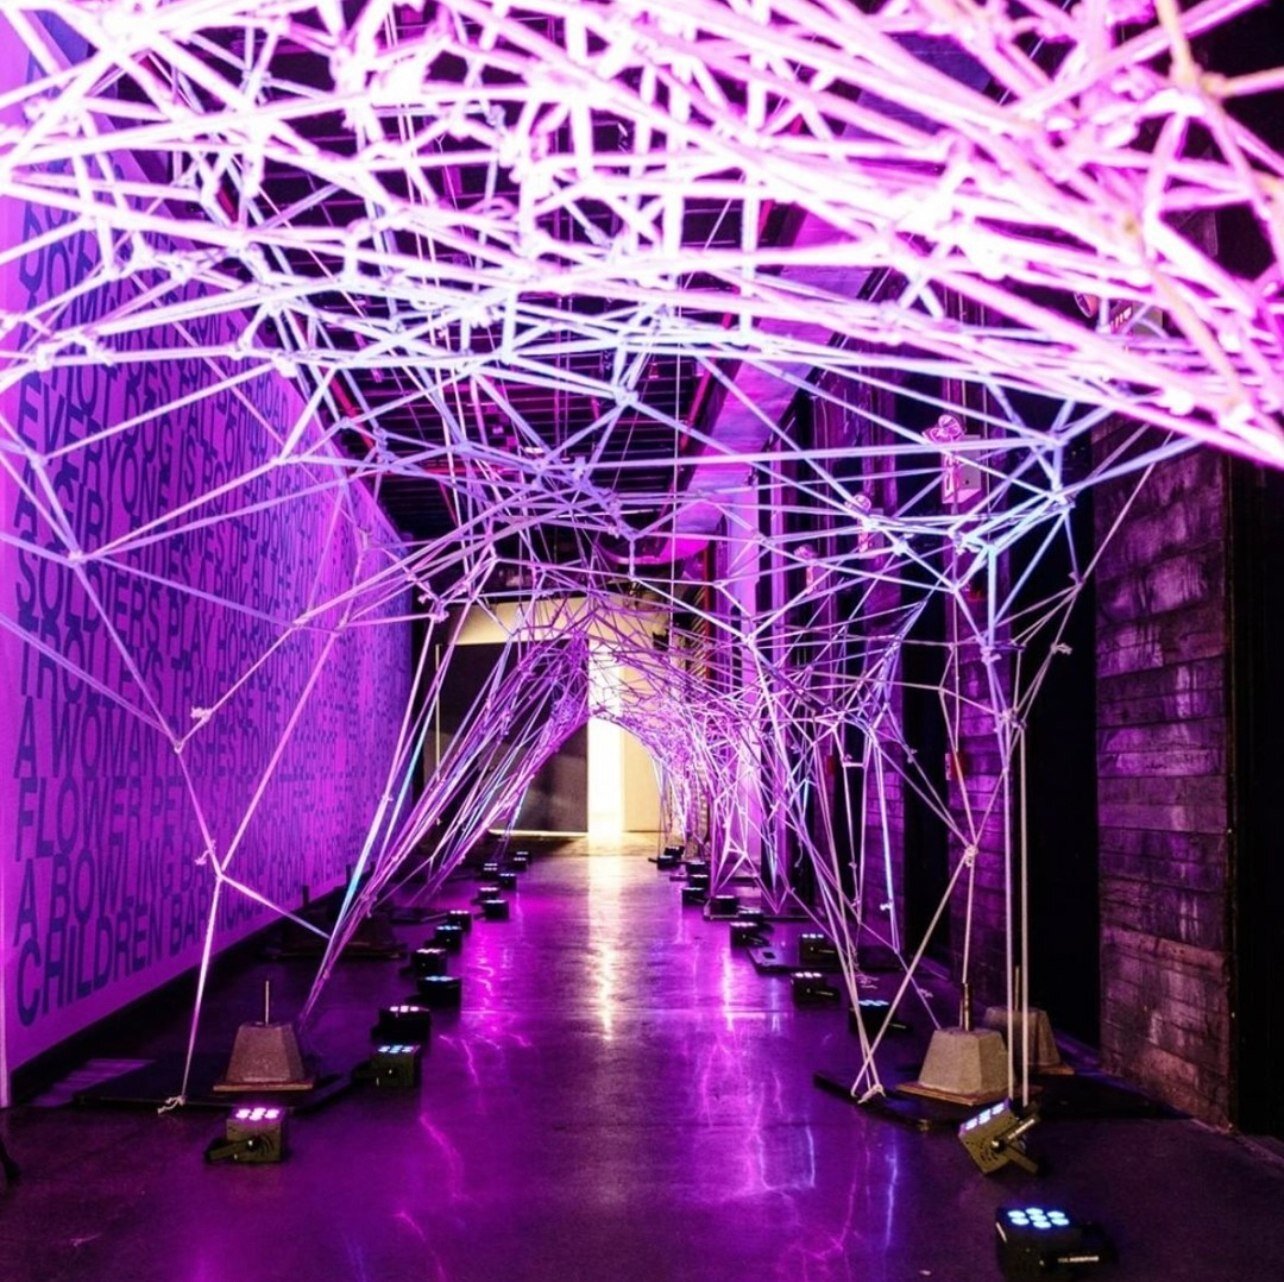 Want an entrance that will stand out from the crowd and set your event apart? We've got you covered. The Wizard Studios team of experts will create the most spectacular grand entrance of your dreams!⁠
.⁠
.⁠
.⁠
.⁠
#grandentrace #magical #entertainment